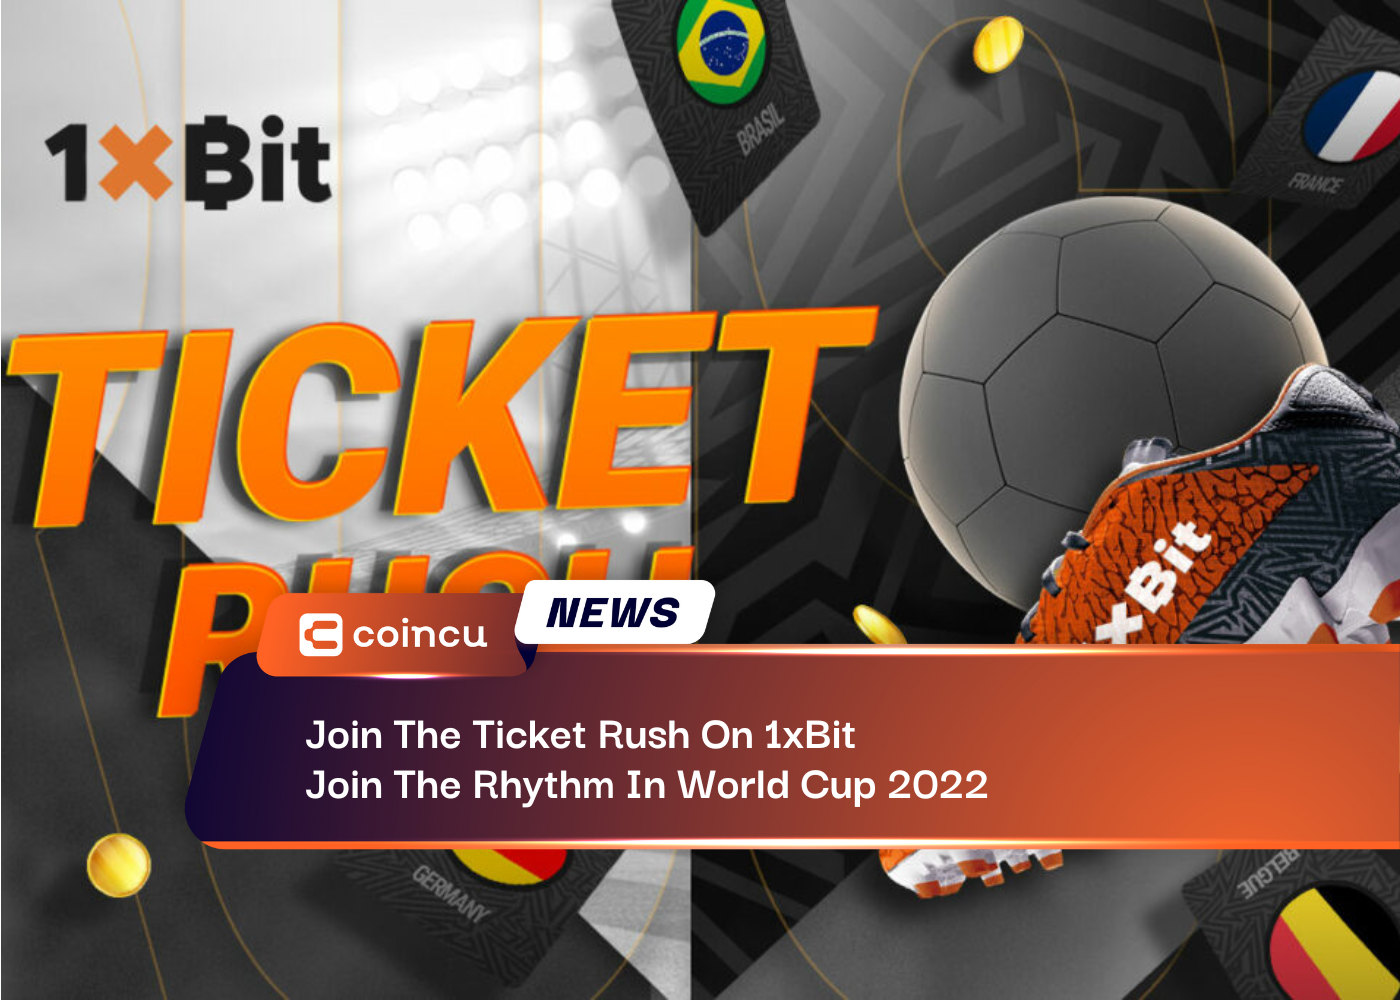 Join The Ticket Rush On 1xBit, Join The Rhythm In World Cup 2022